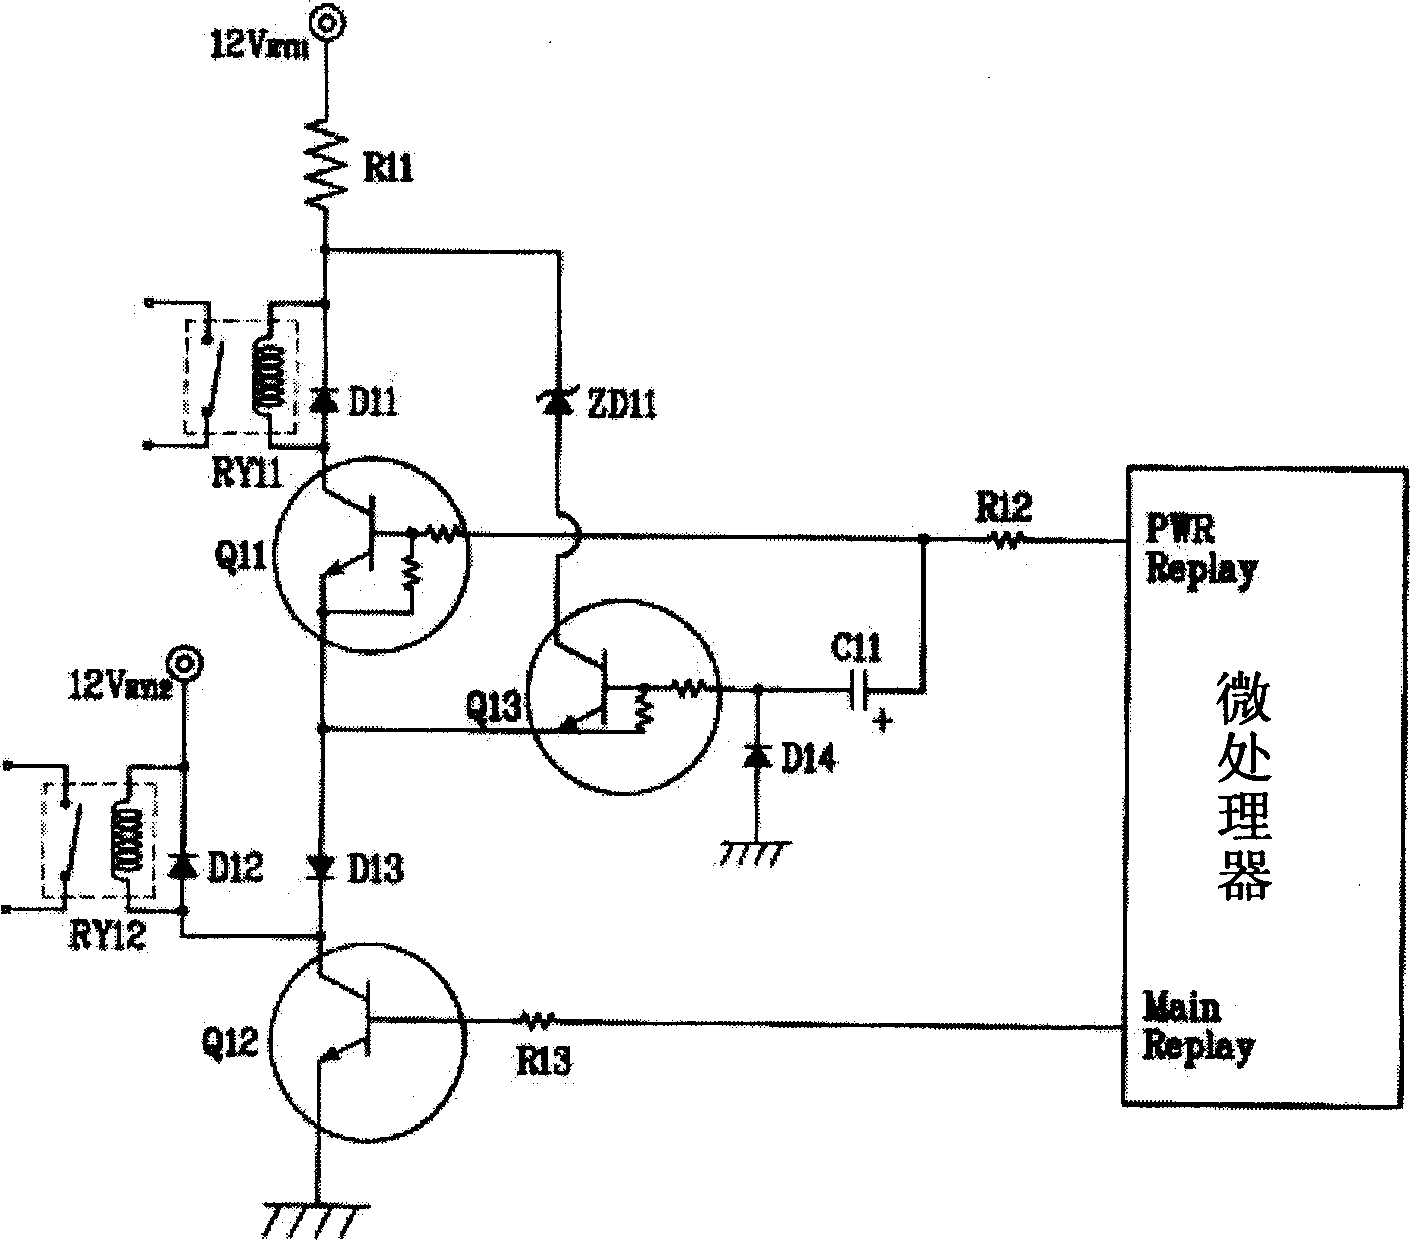 Impulse current prevented circuit of microwave oven